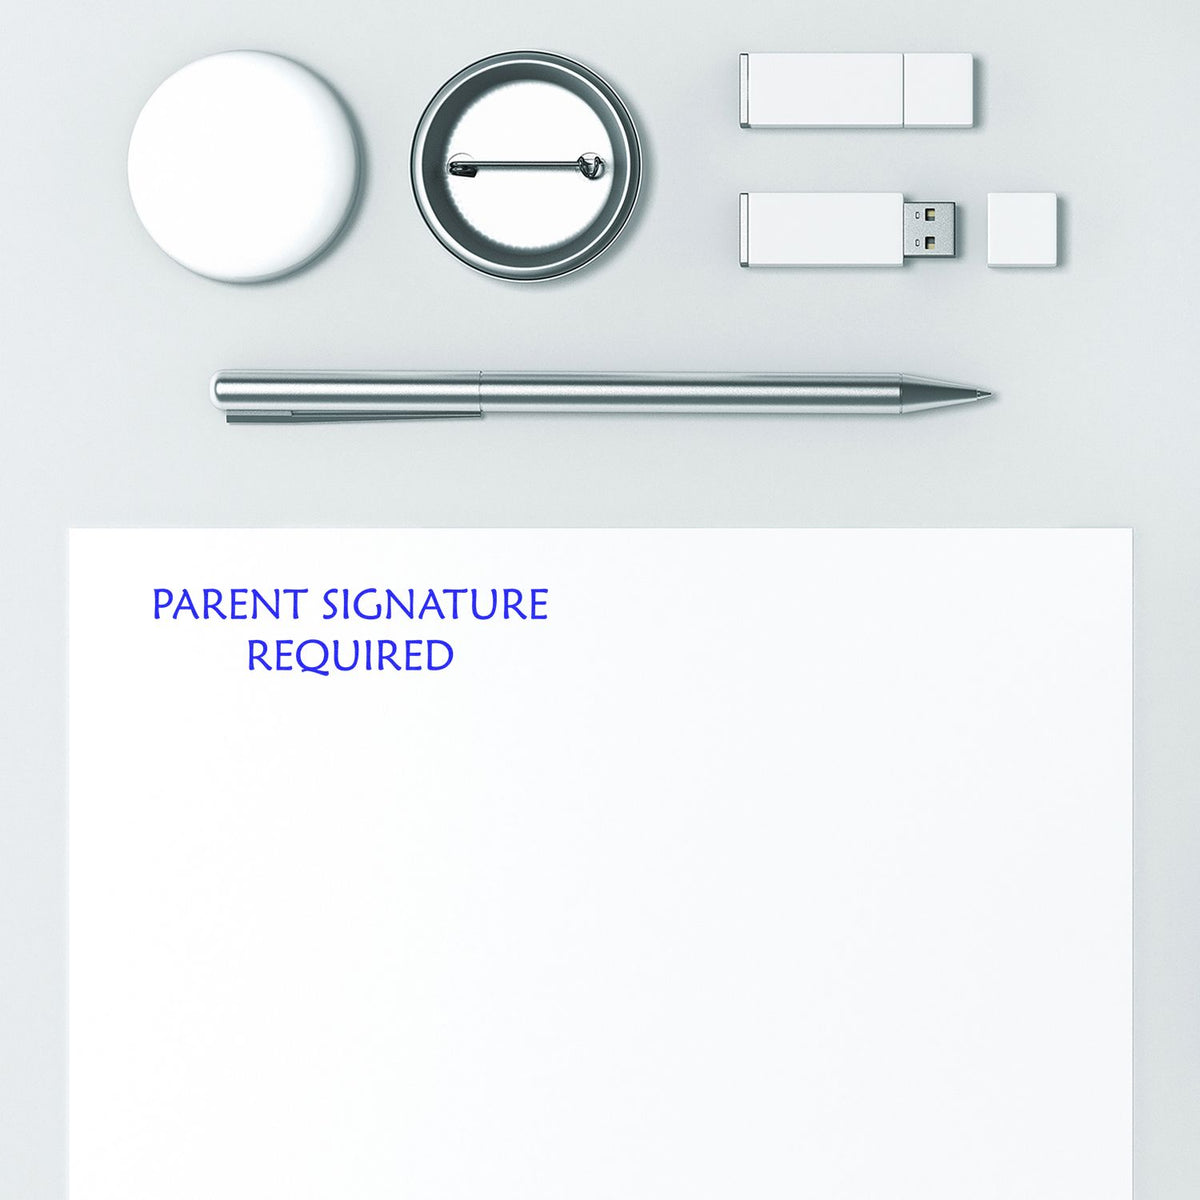 Large Parent Signature Required Rubber Stamp In Use Photo